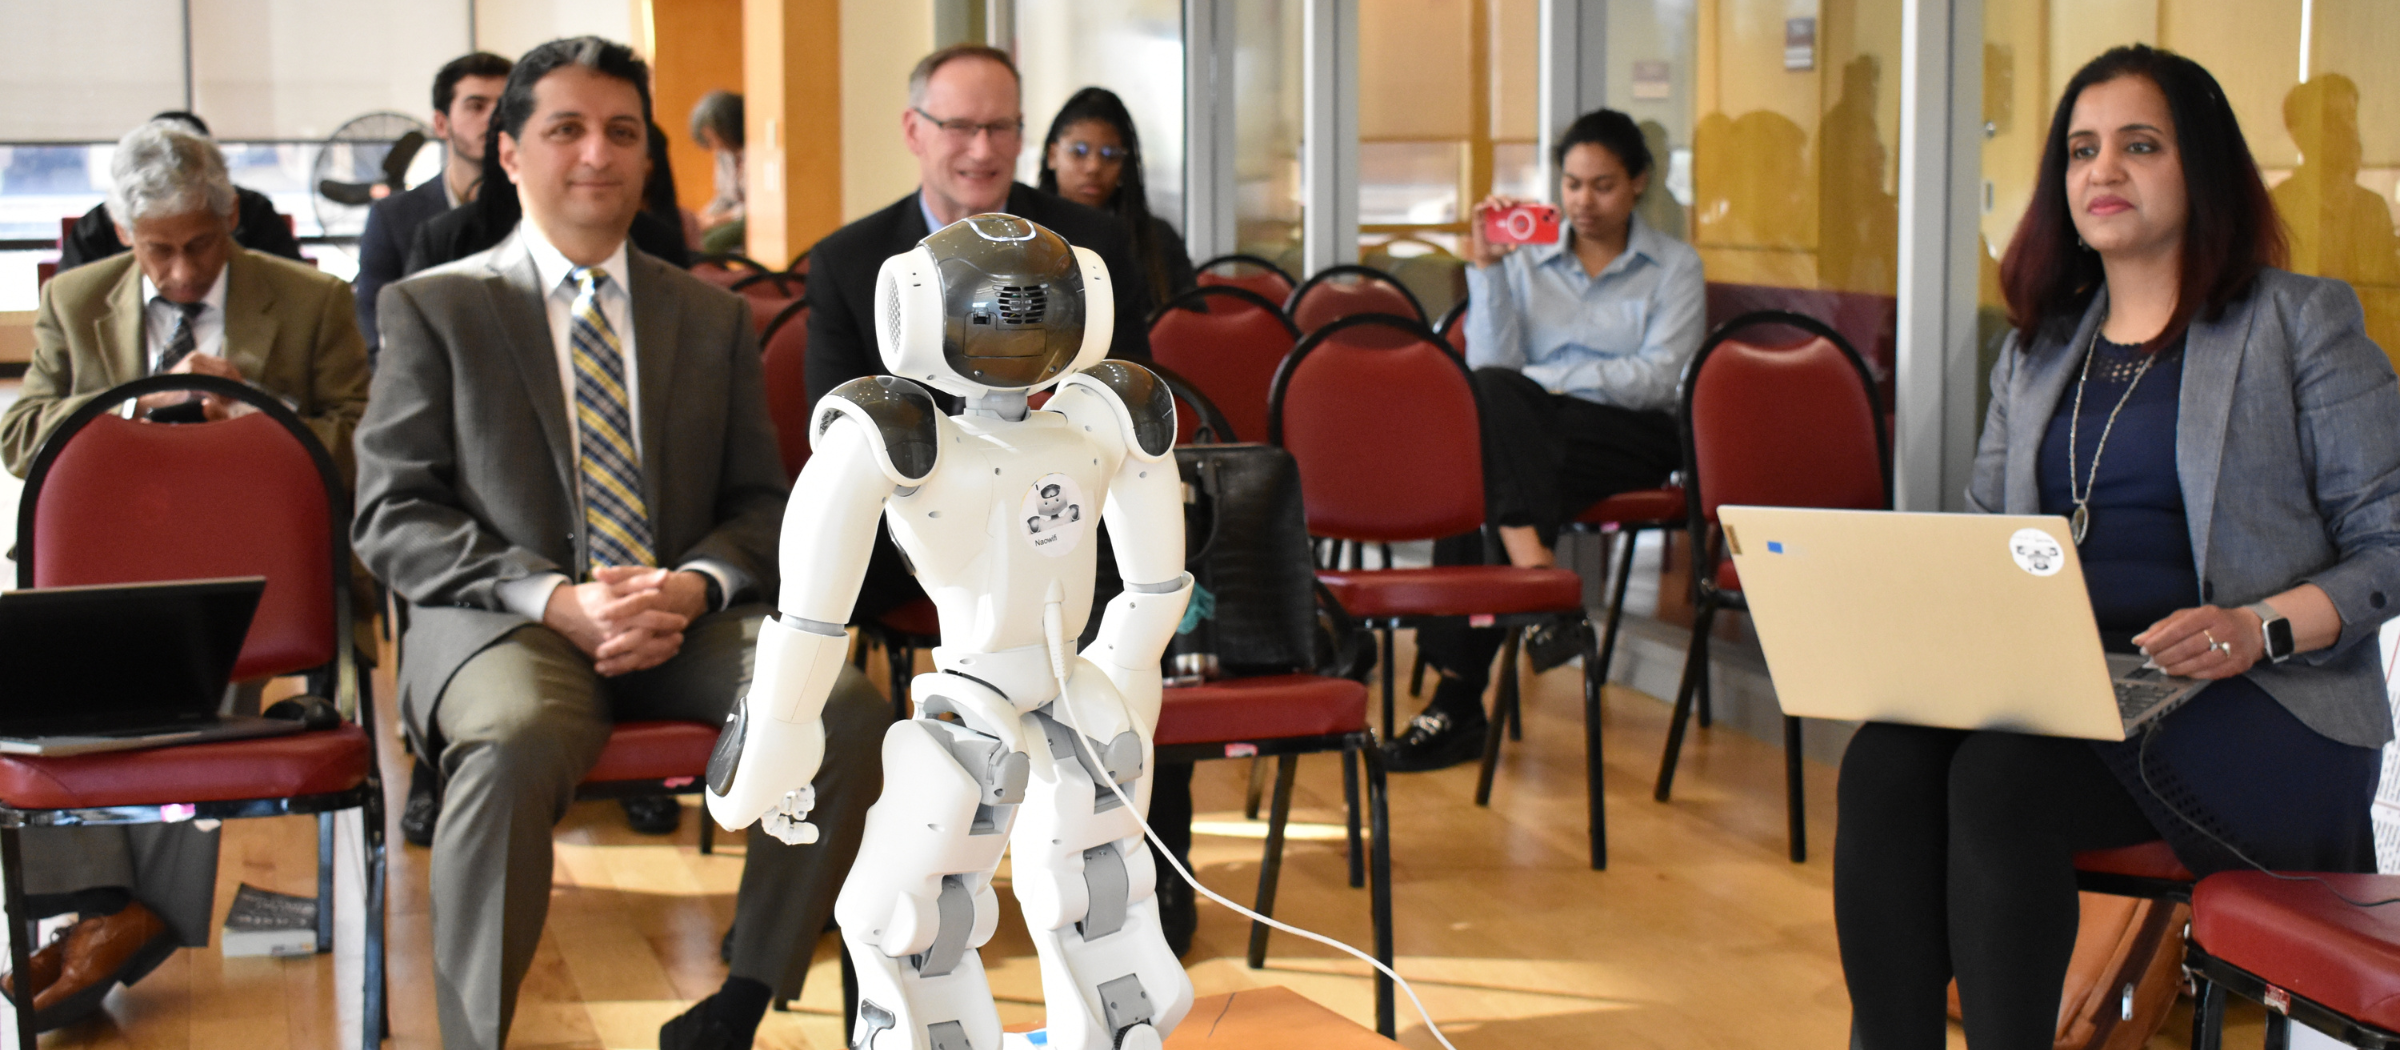 Social robotics project and SBPA highlighted at AACSB conference